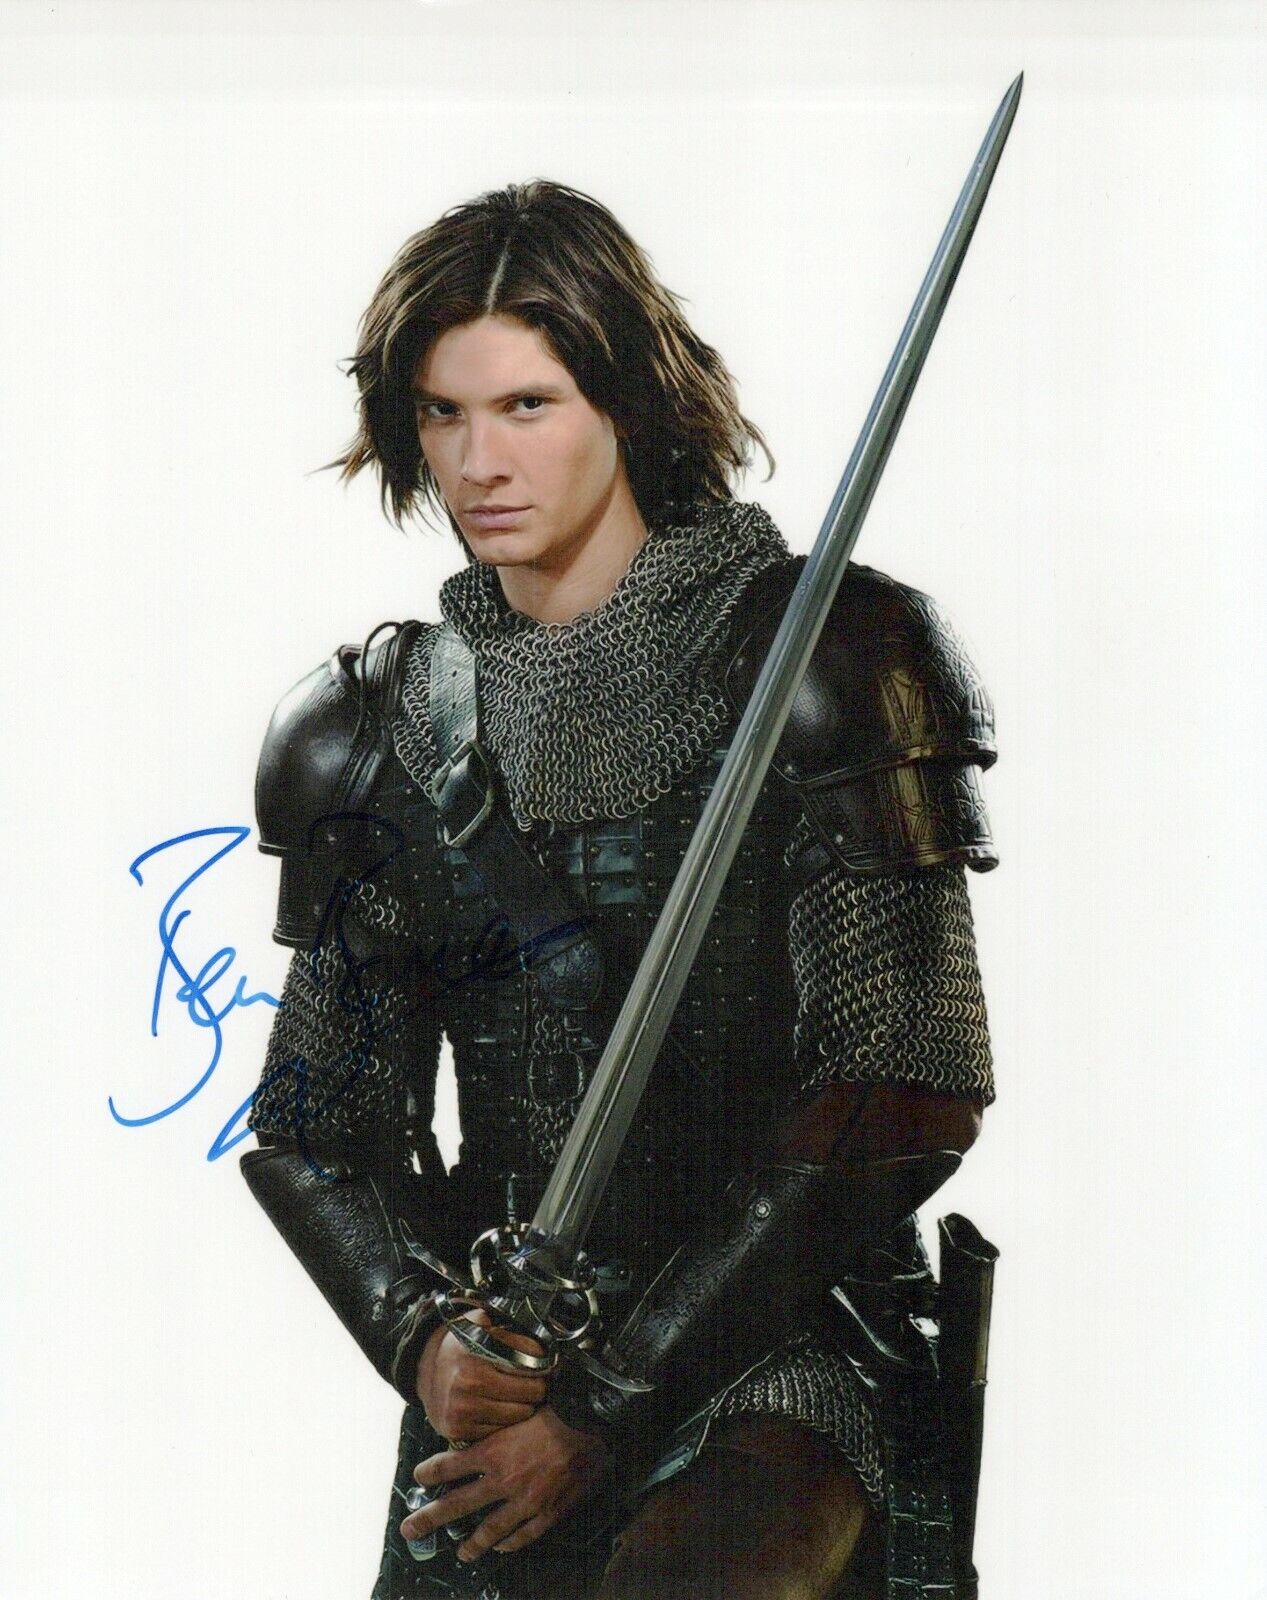 Ben Barnes Chronicles Of Narnia Prince Caspian autographed Photo Poster painting signed 8x10 #5